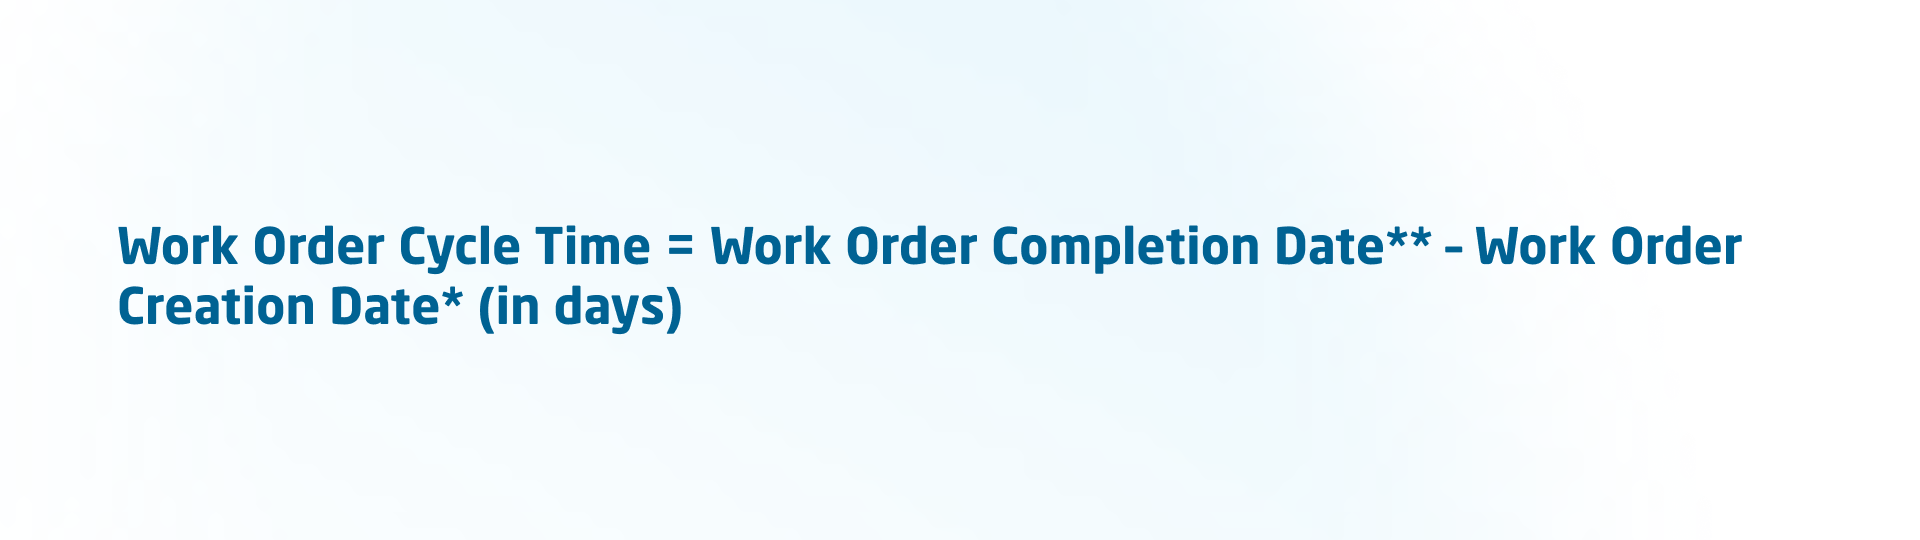 work order cycle time calculation